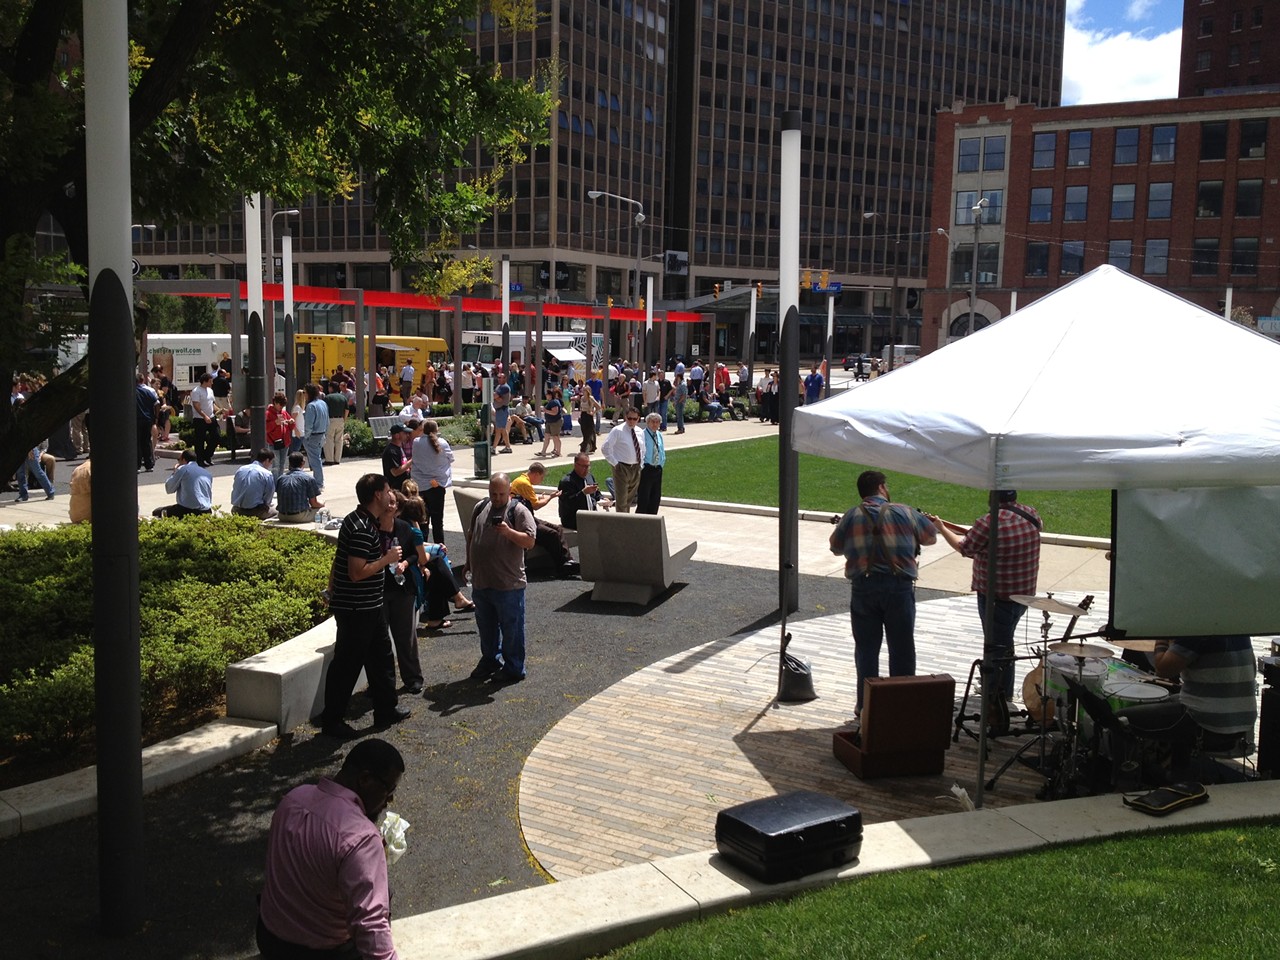 Lunch, Live Music, and Fun! Here's What you Missed at Walnut Wednesday Today